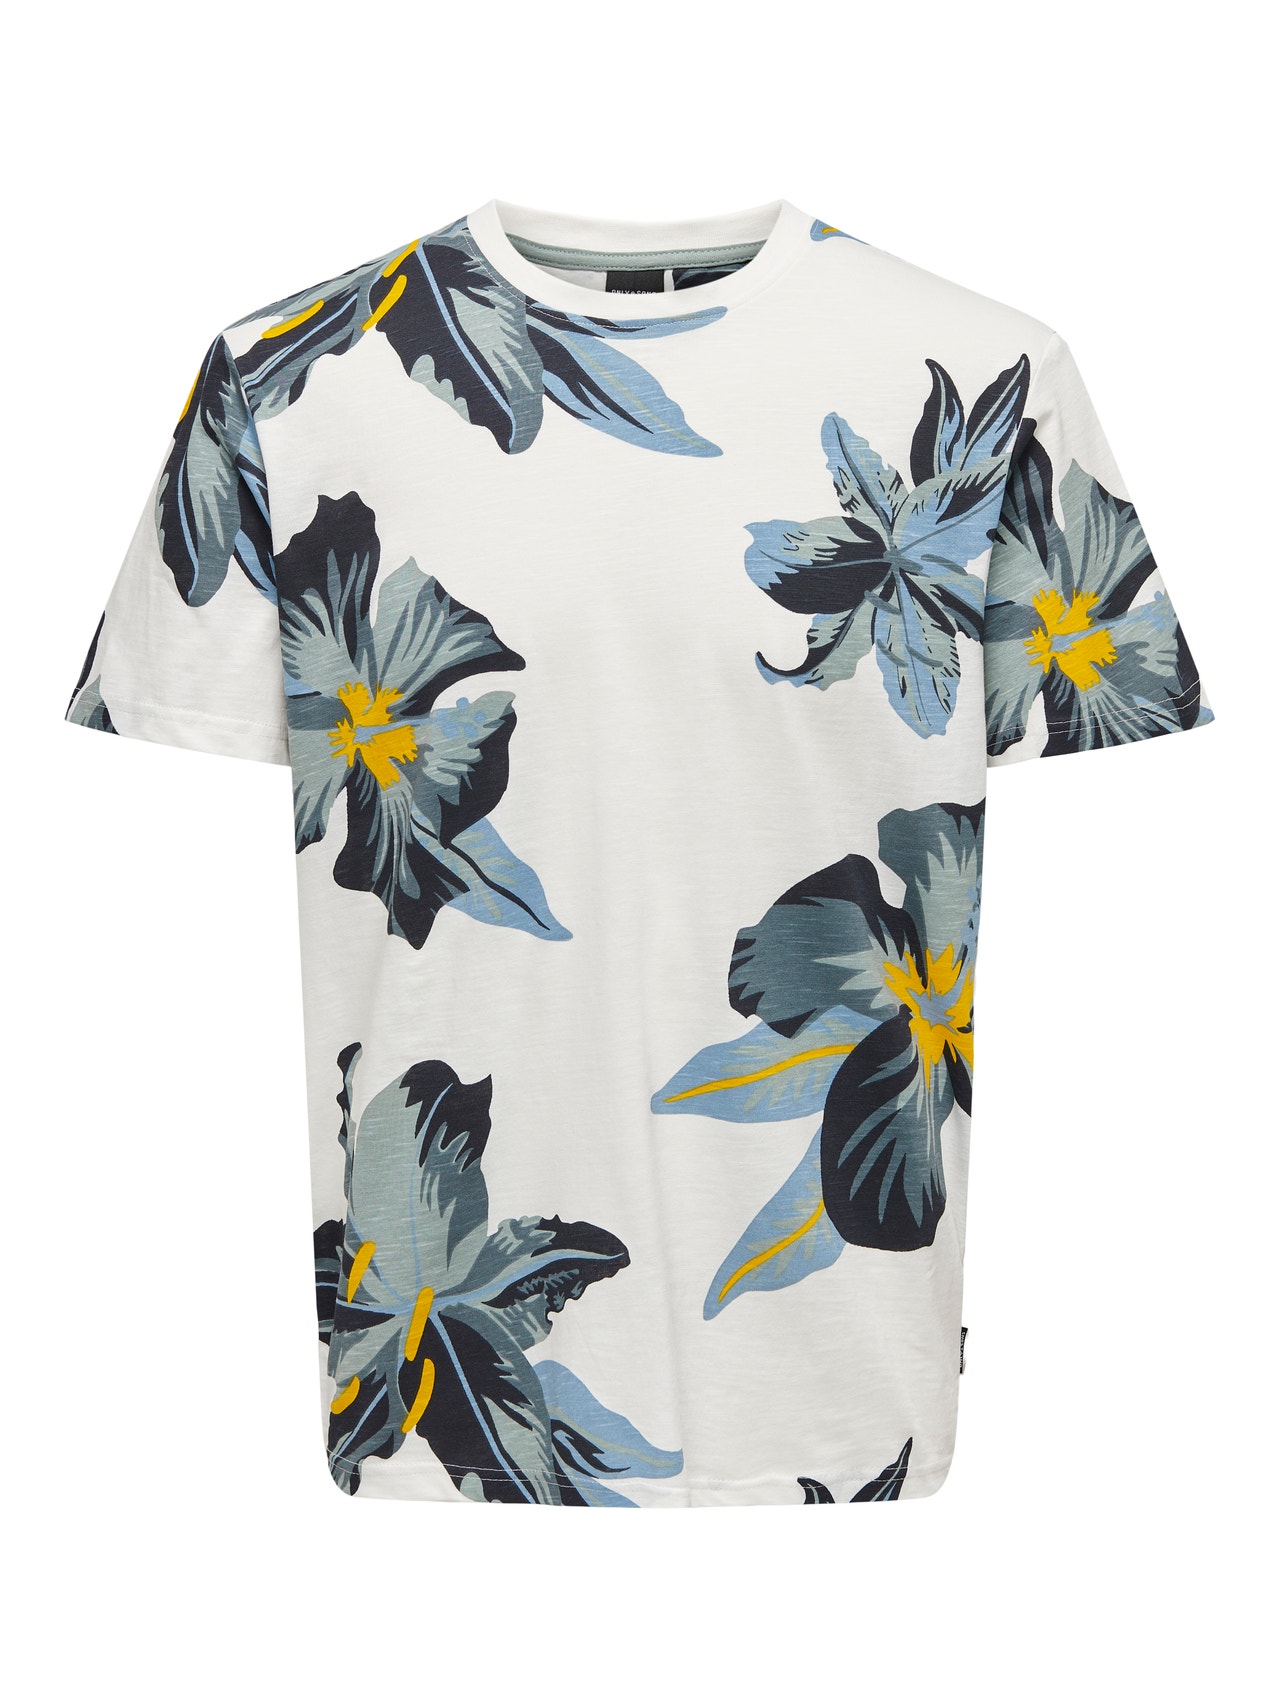 ONLY & SONS O-hals t-shirt med print -Star White - 22022164